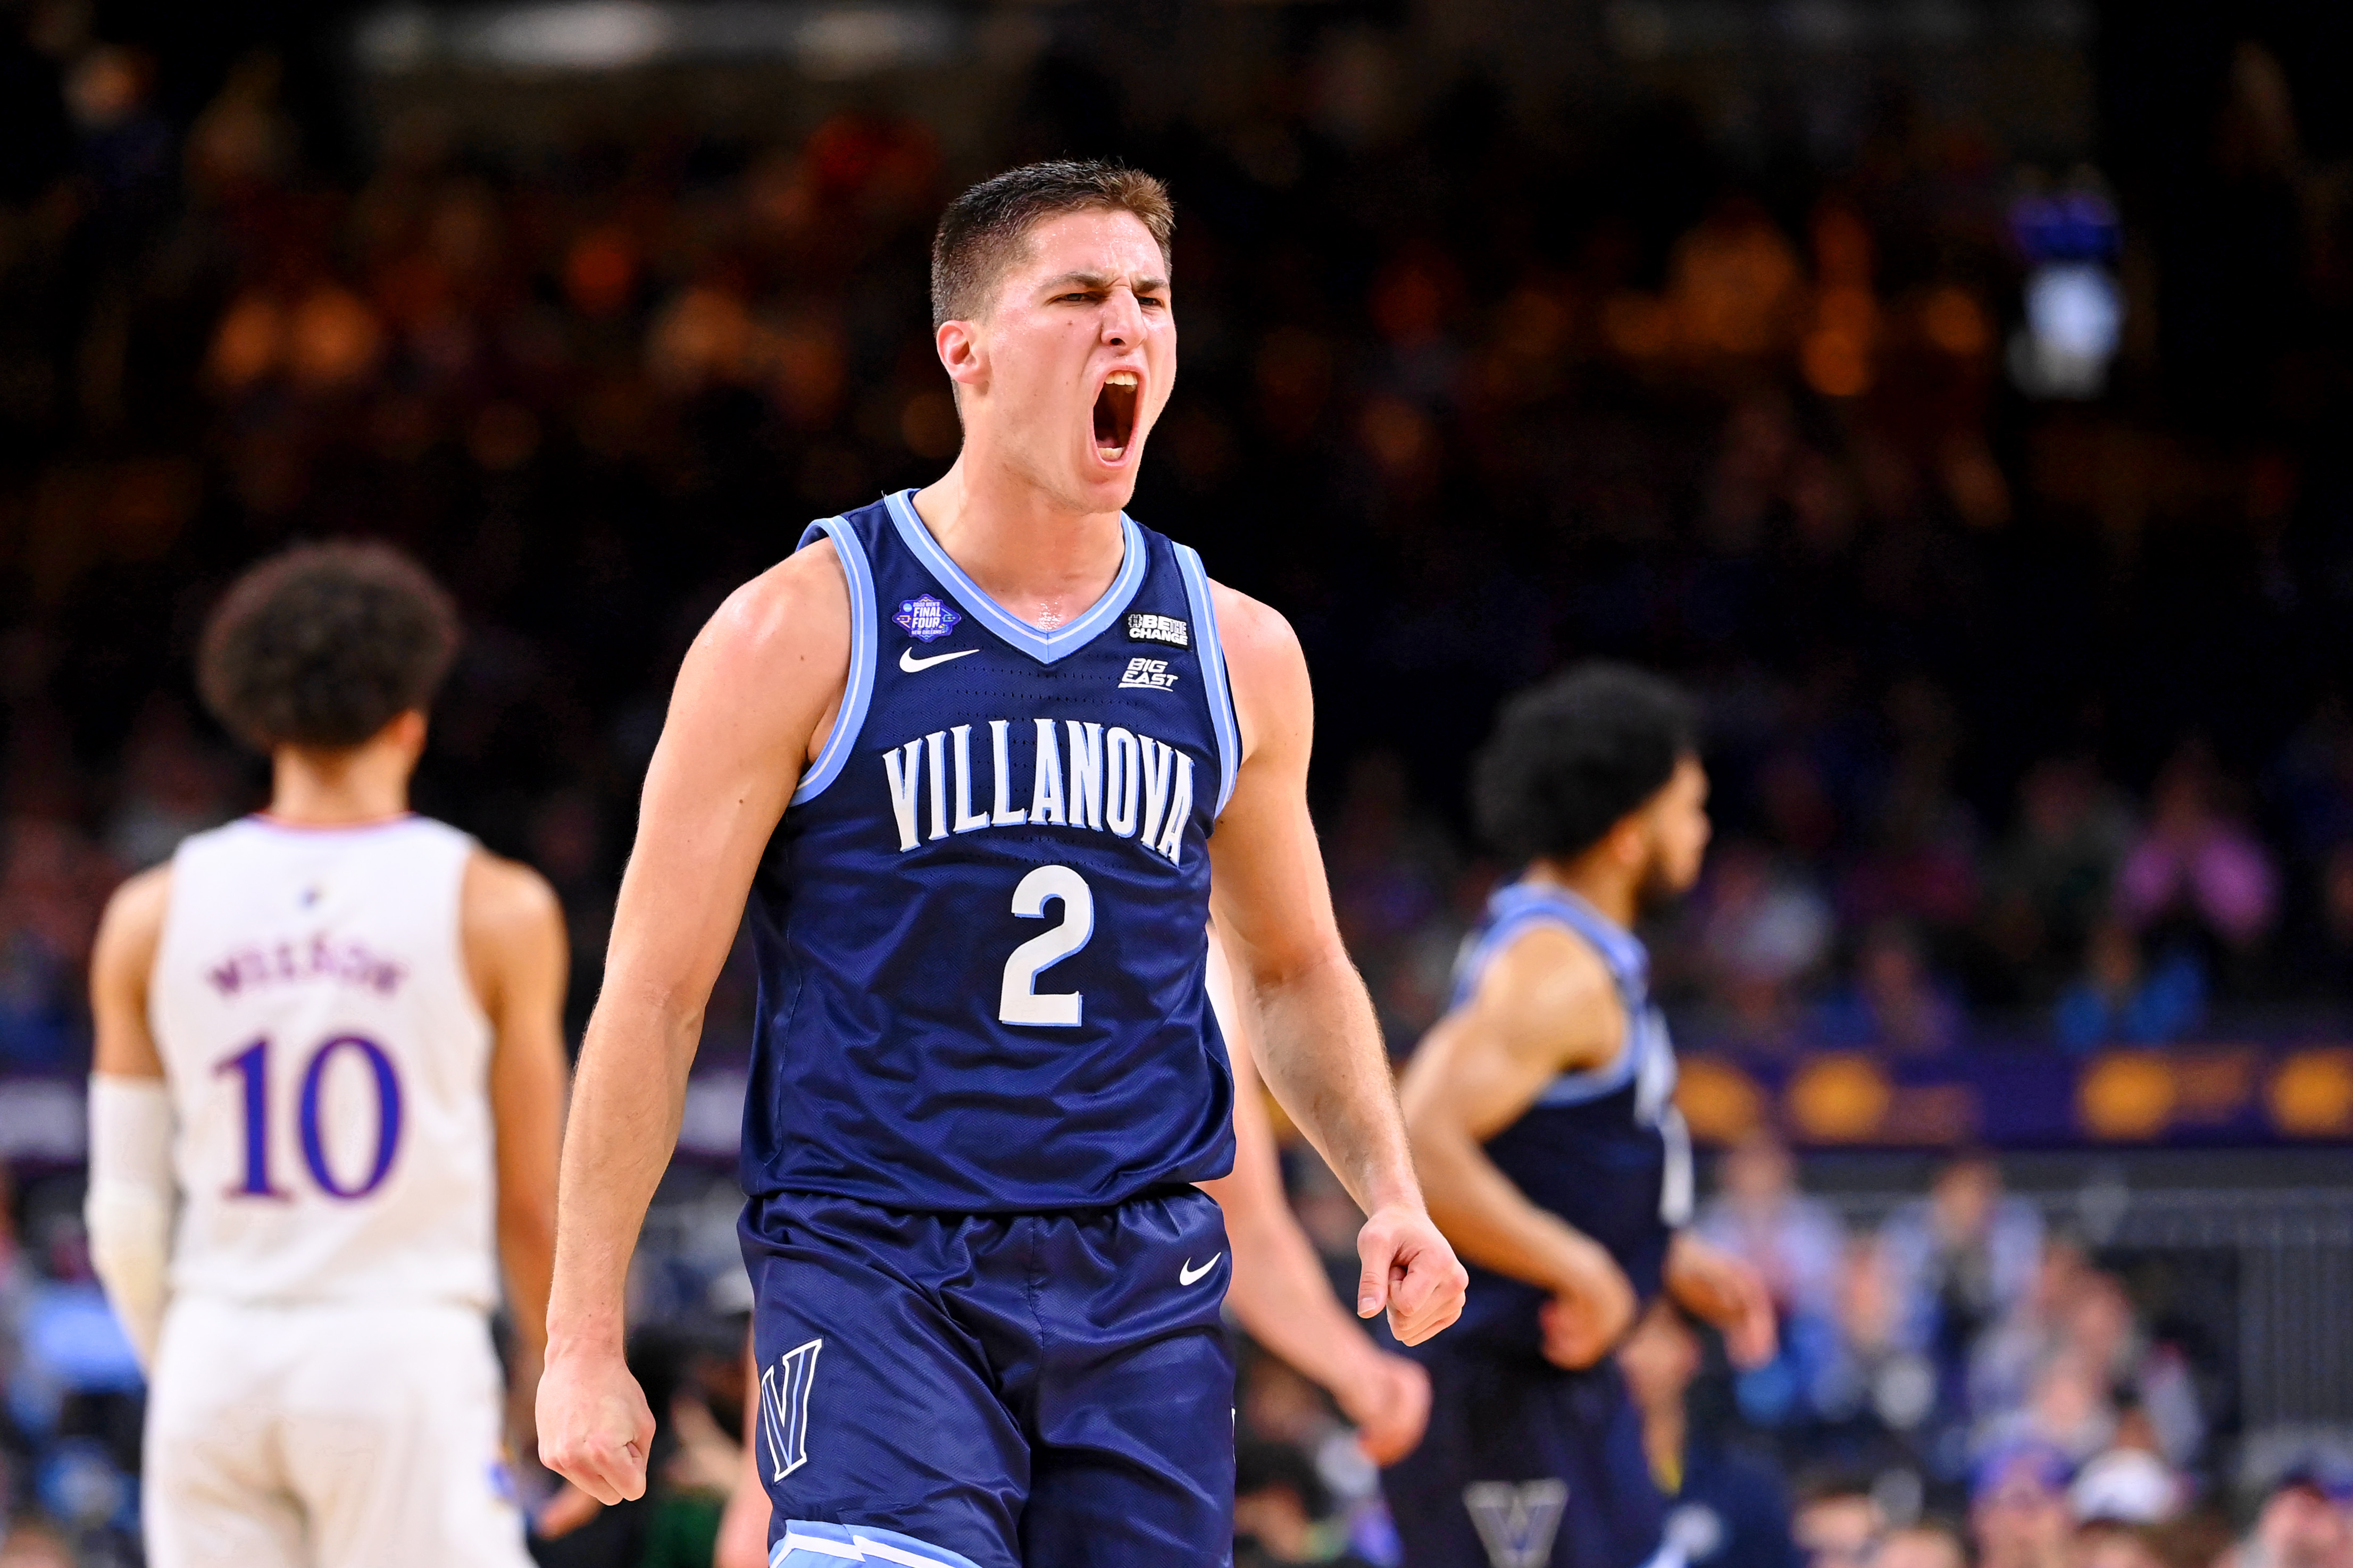 Villanova Wildcats guard Collin Gillespie (2) reacts after a play against the Kansas Jayhawks during the first half during the 2022 NCAA men's basketball tournament Final Four semifinals at Caesars Superdome.